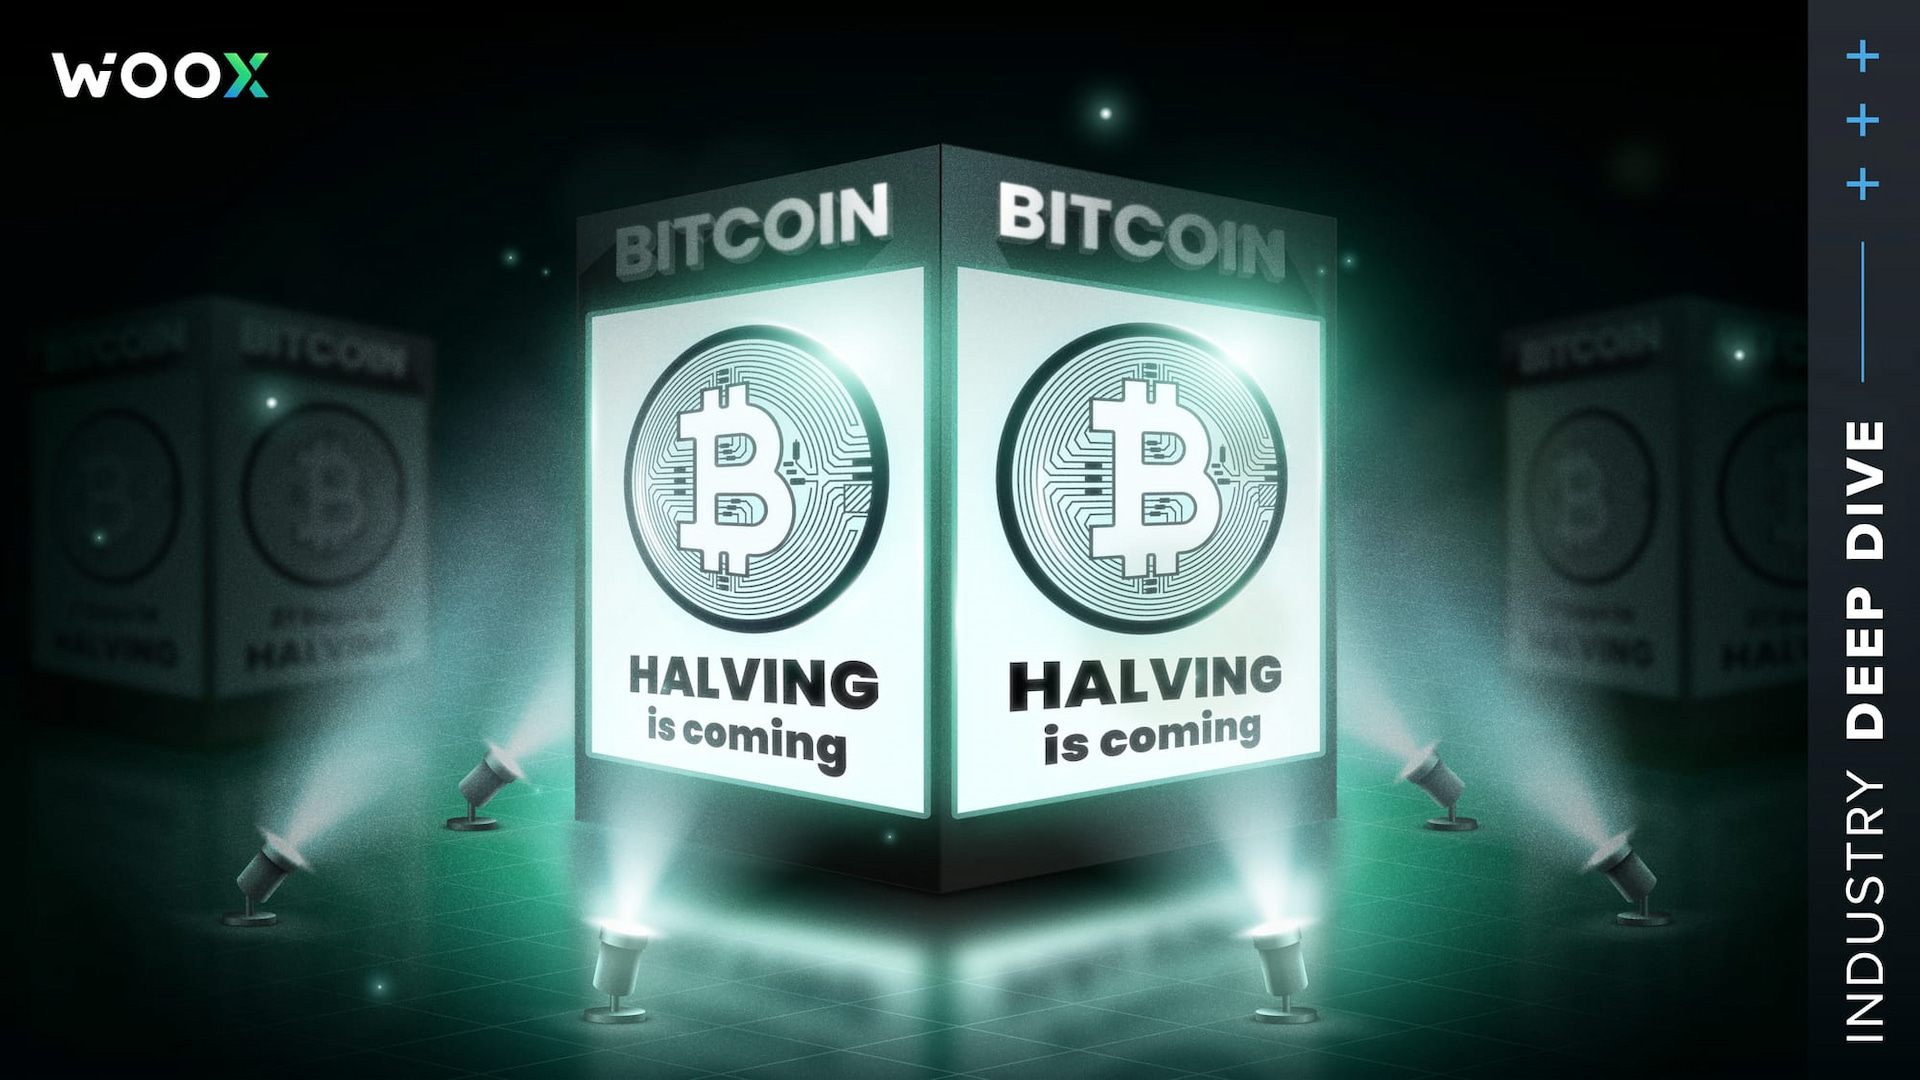 The BTC halving event: this time is no different